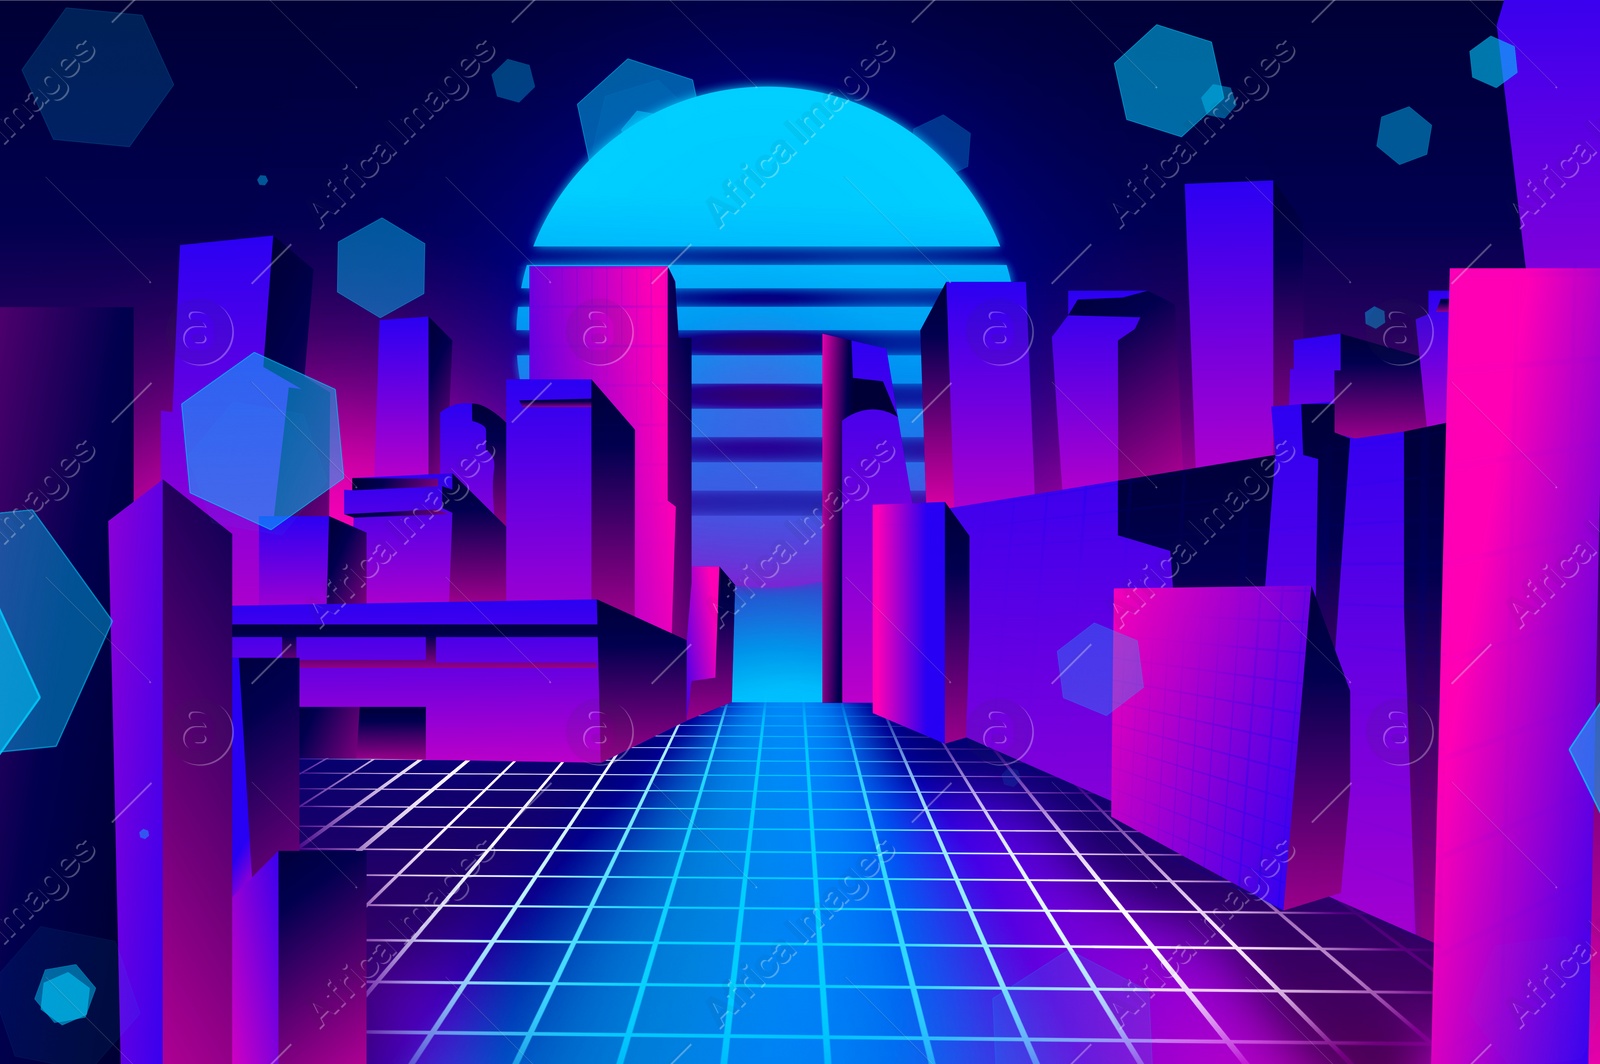 Illustration of Metaverse. Digital city with buildings and luminary, illustration